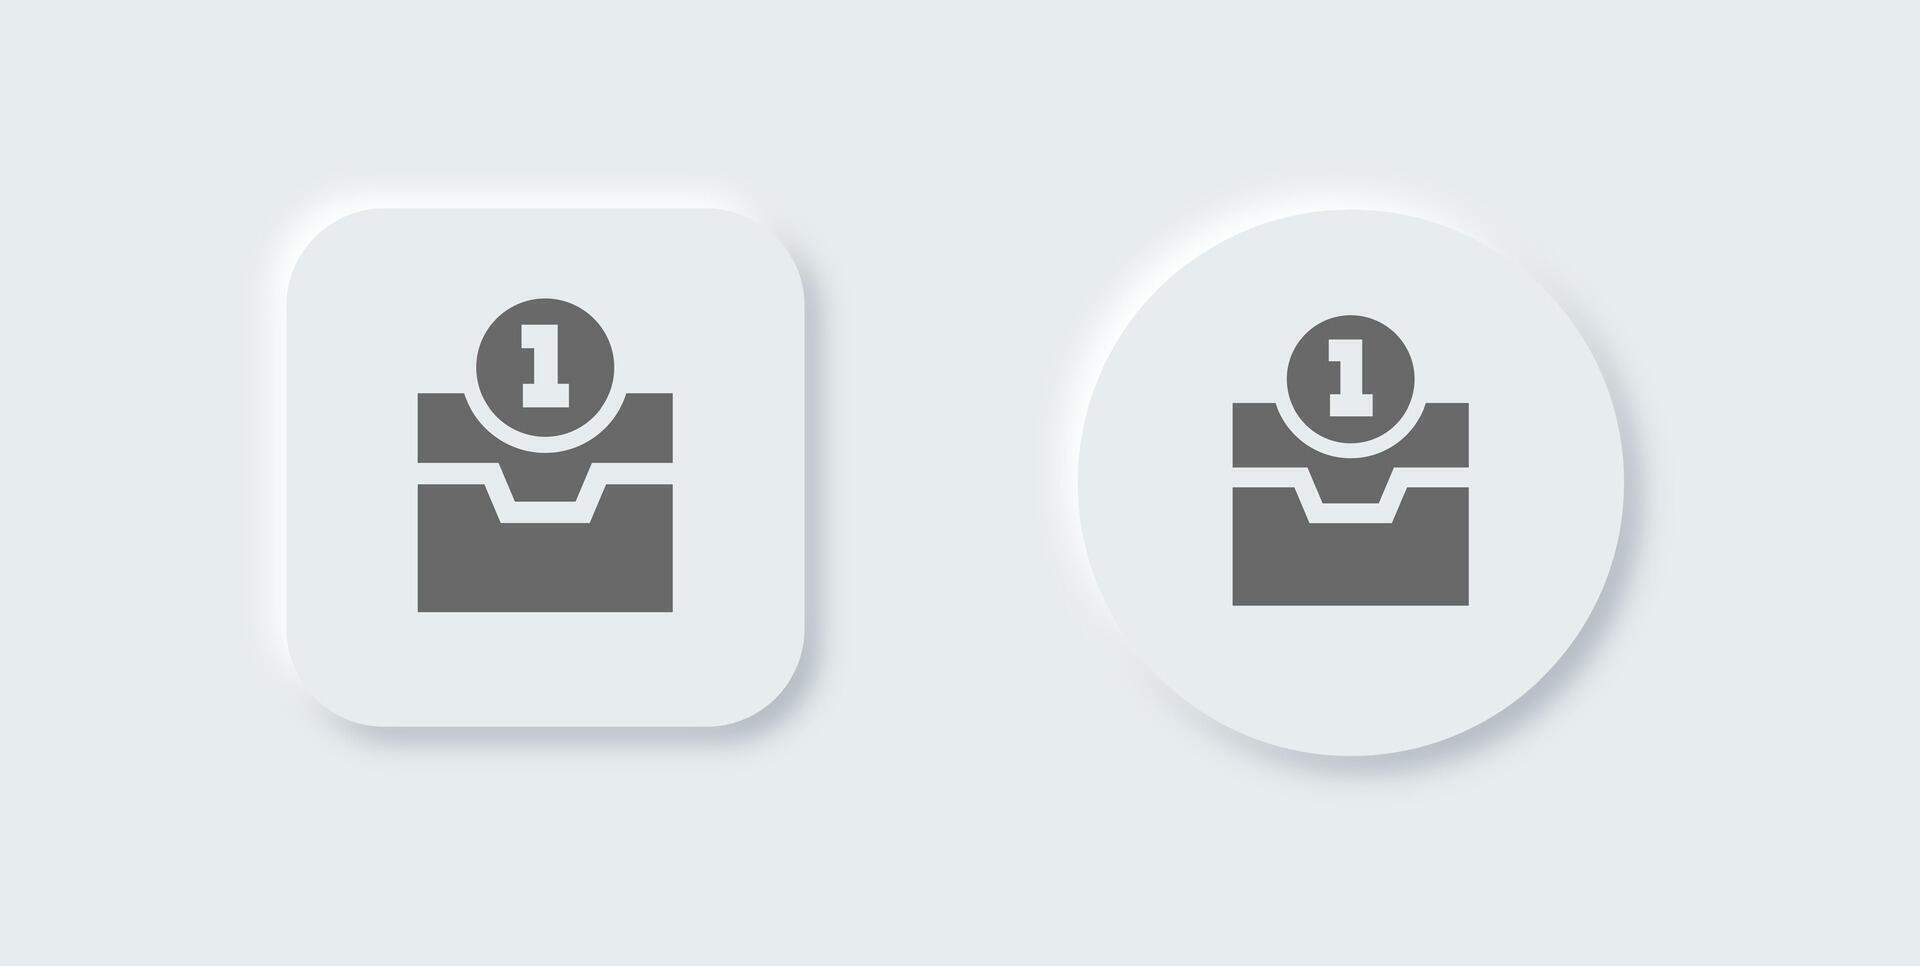 Direct message solid icon in neomorphic design style. Inbox signs vector illustration.